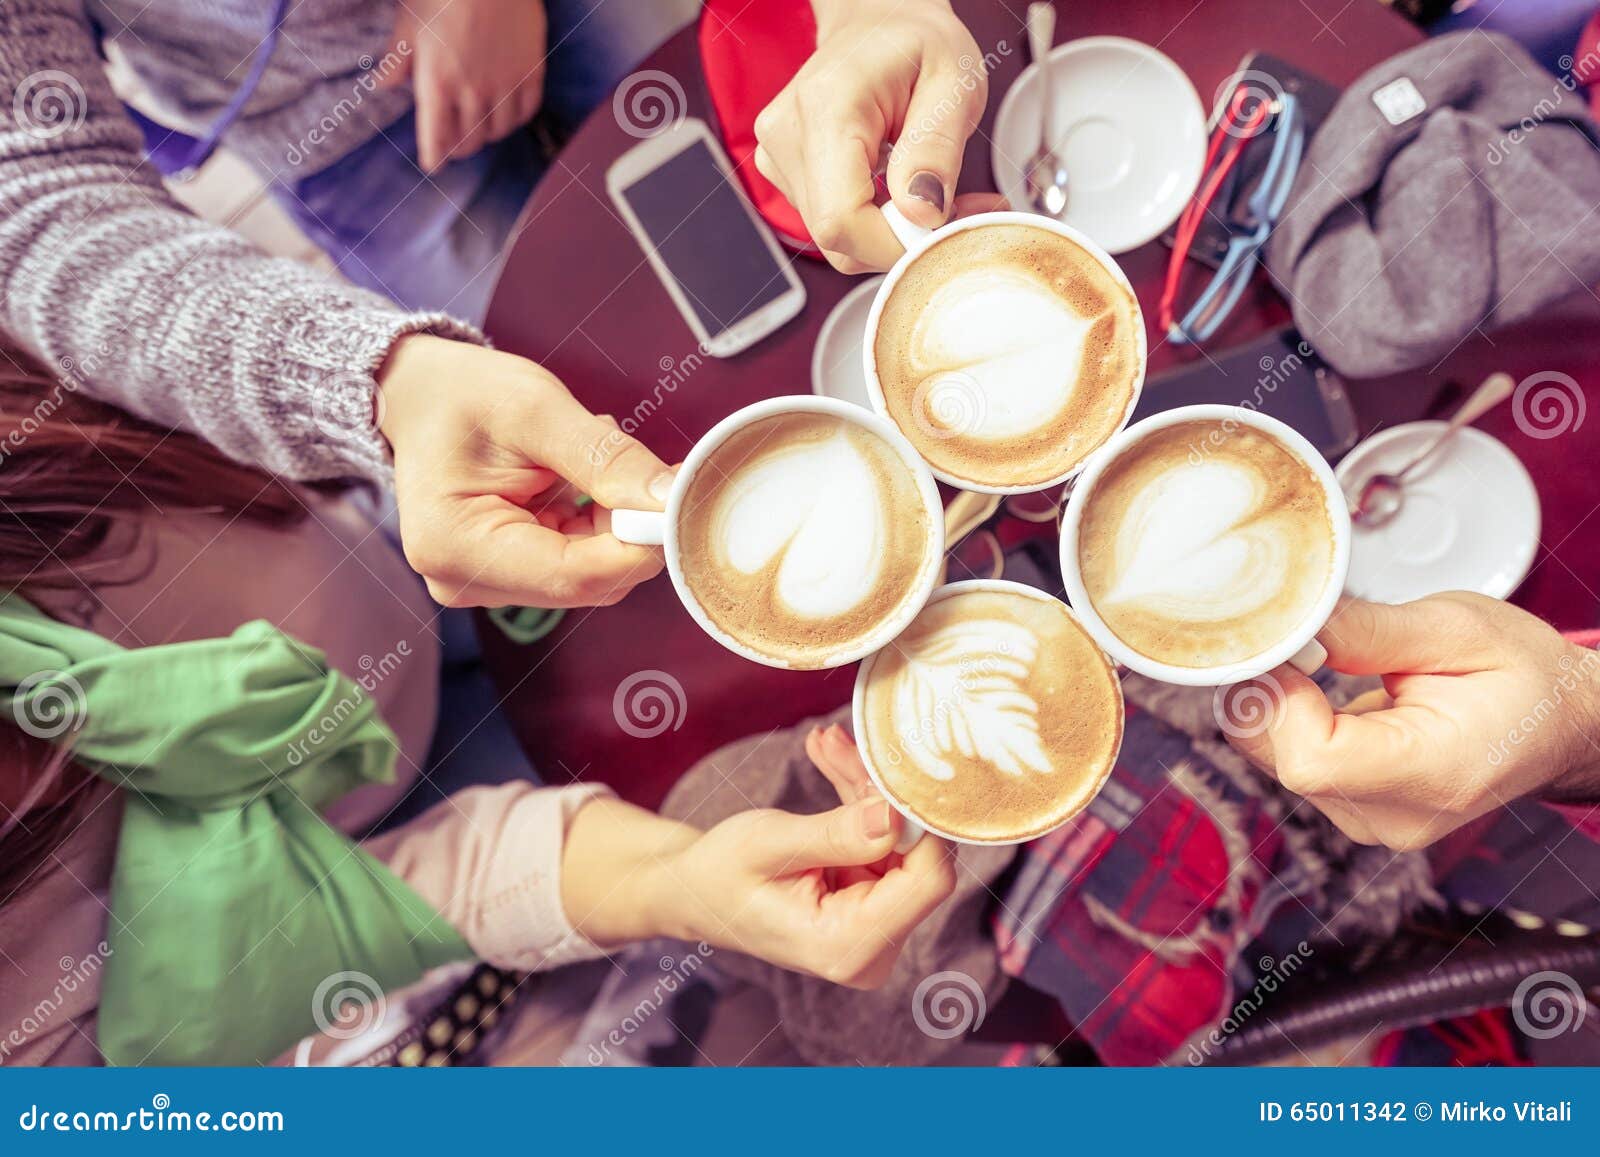 group of friends drinking cappuccino at coffee bar restaurant